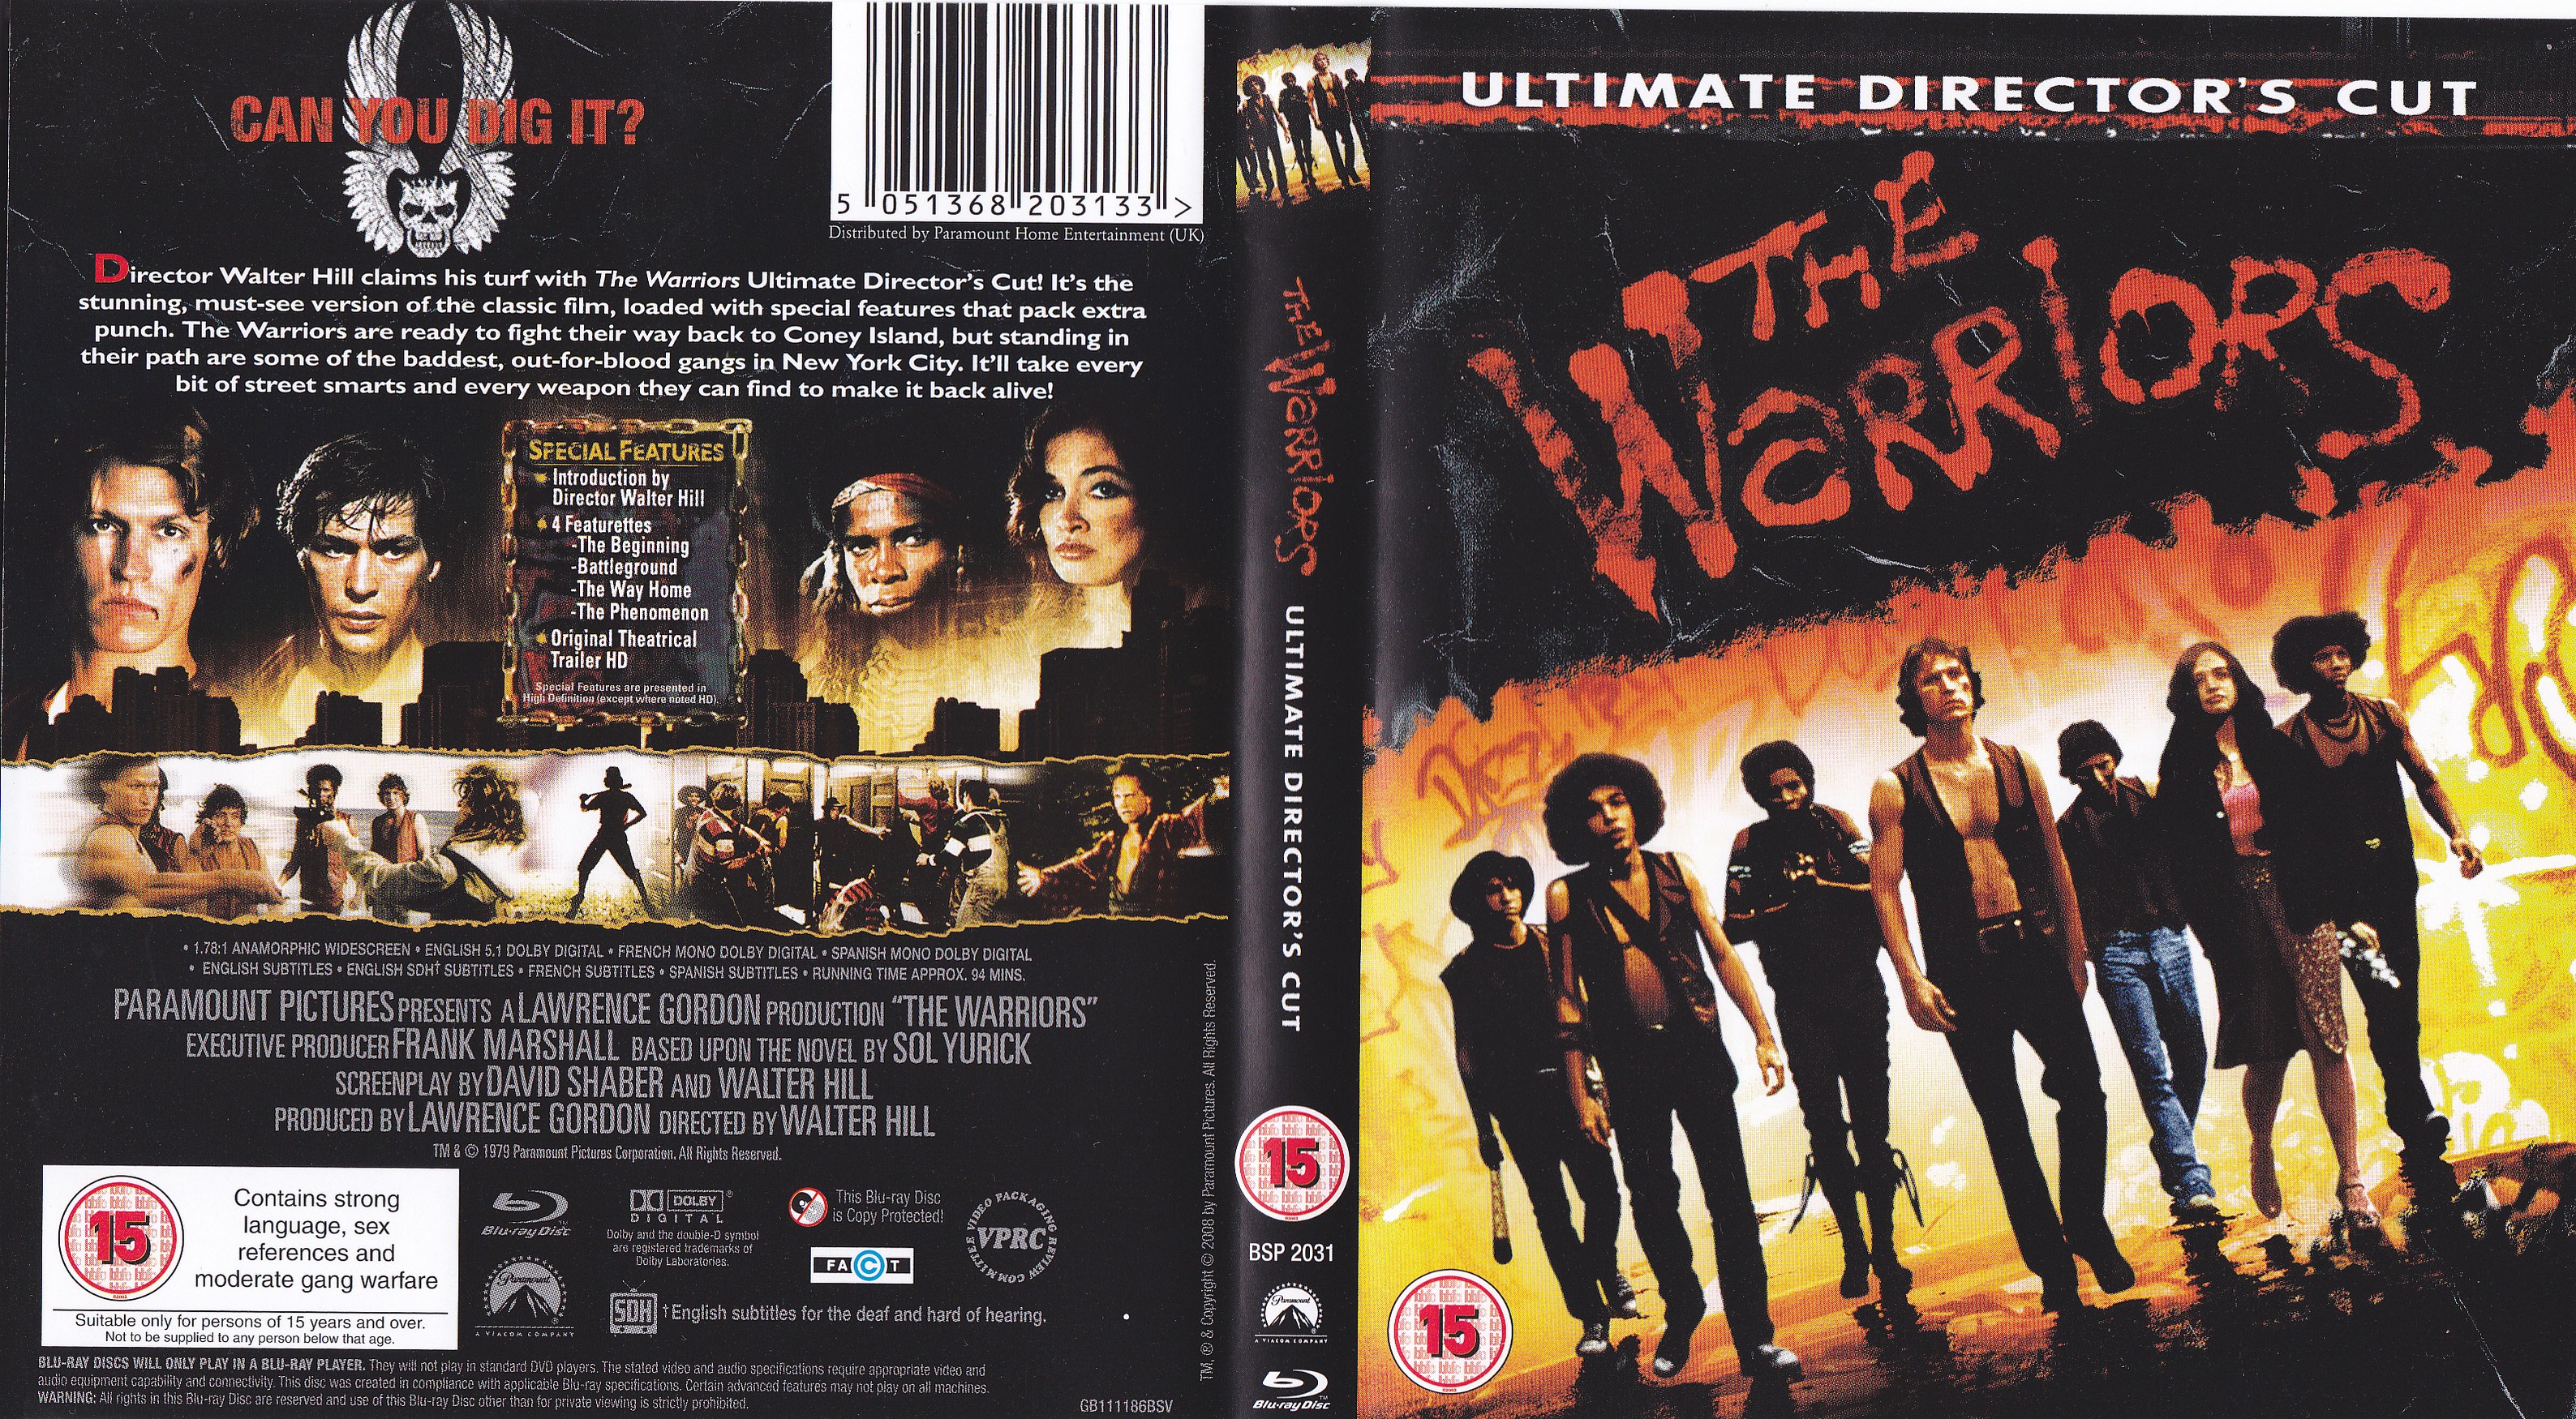 Jaquette DVD The warriors Zone 1 (BLU-RAY)